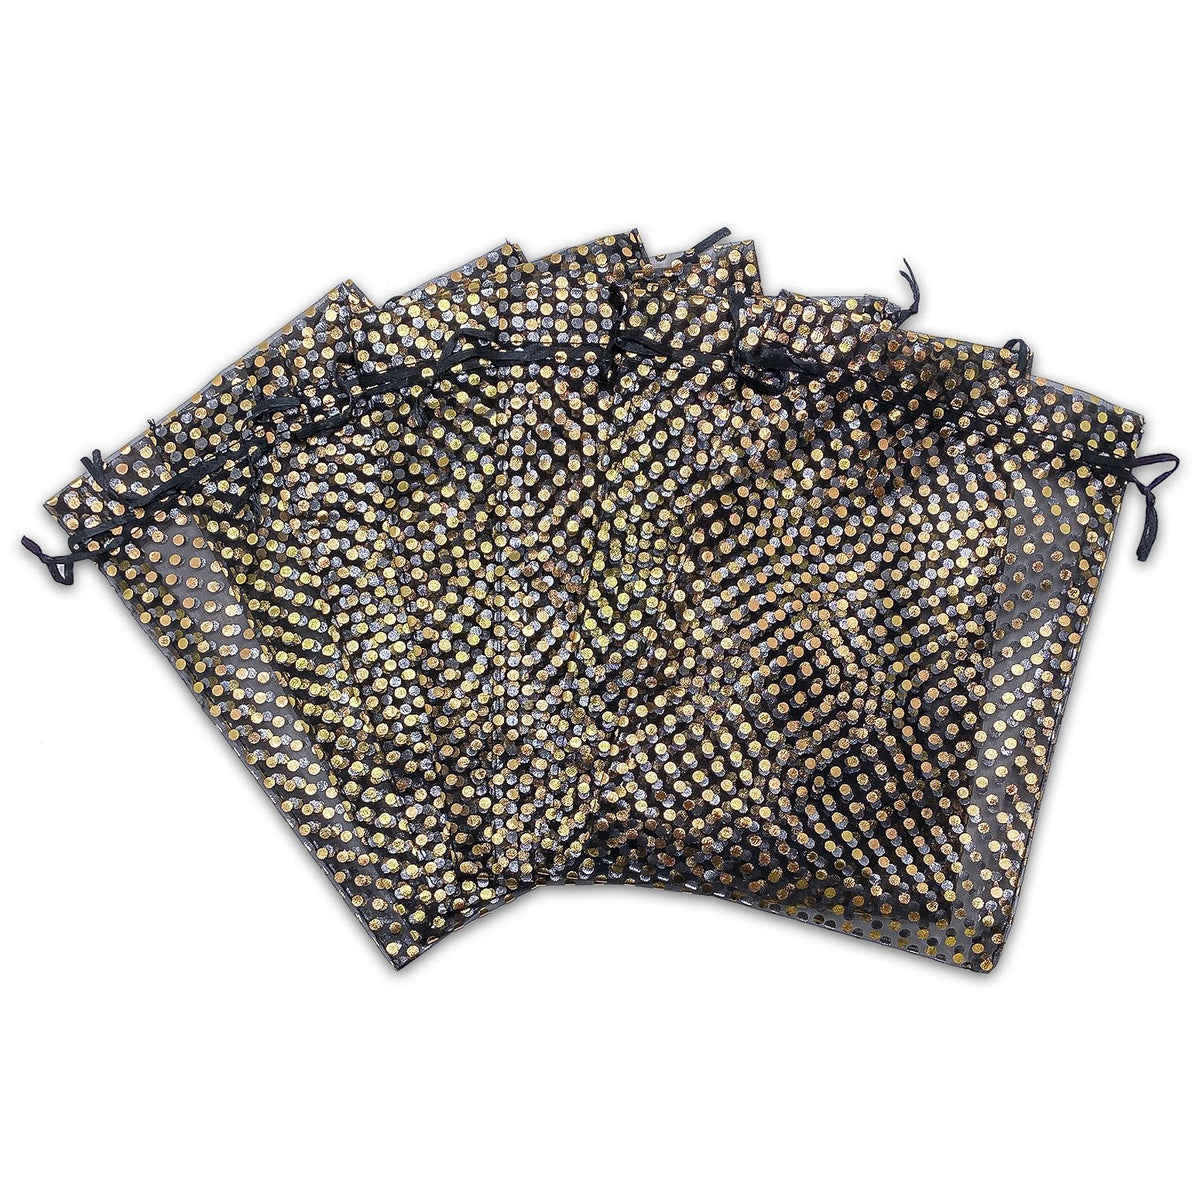 Flat Jewelry Pouch - Gold Embroidered Polka Dots - Sézane